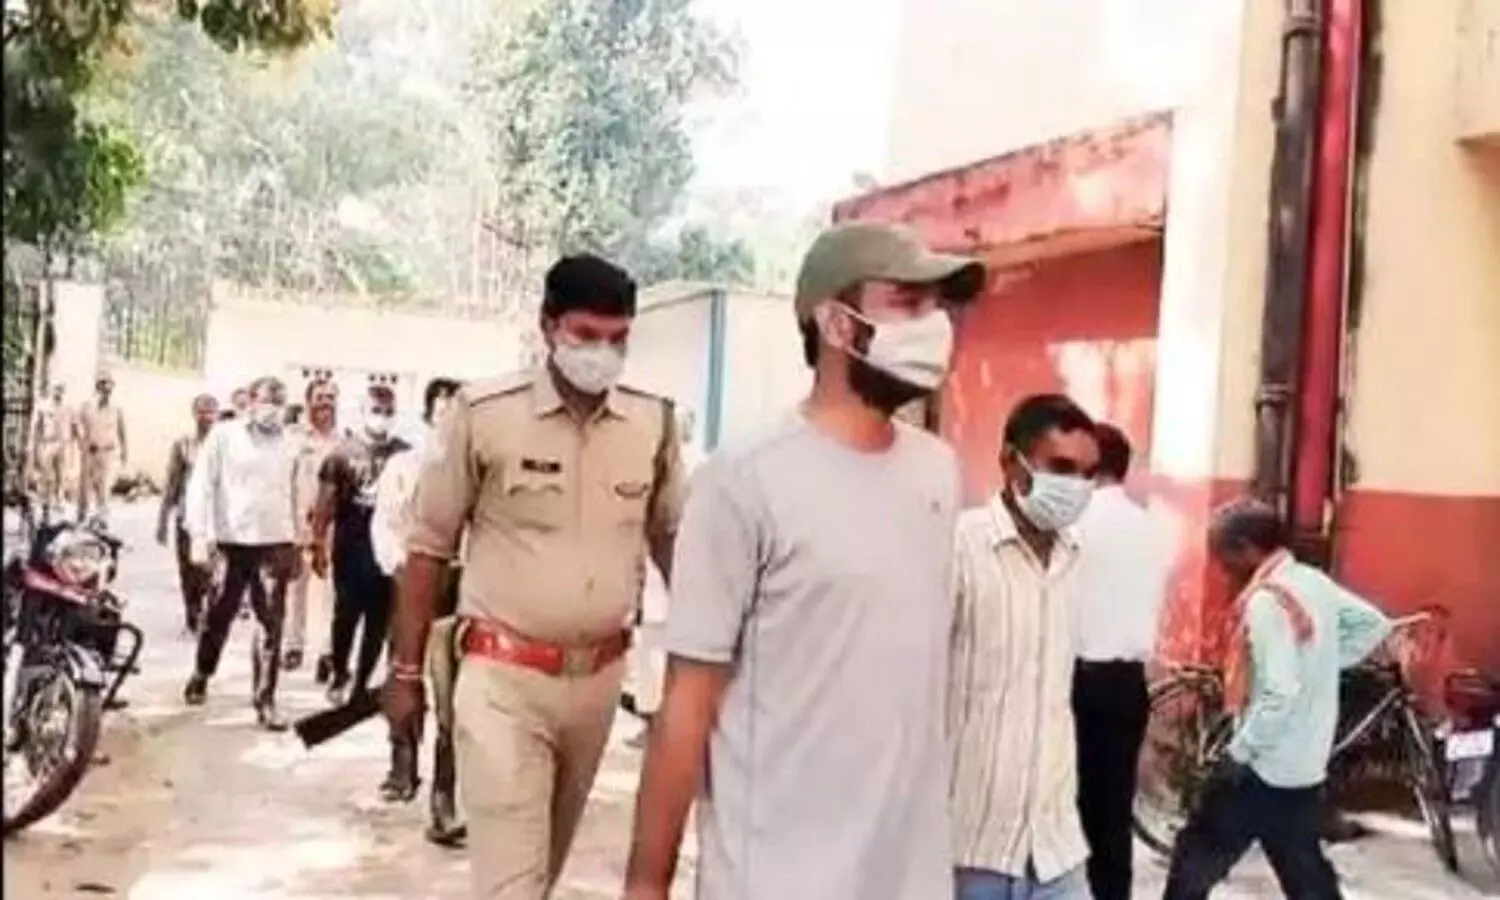 Lakhimpur Kheri violence 4 accused including BJP member Sumit Jaiswal will remain police remand till October 25